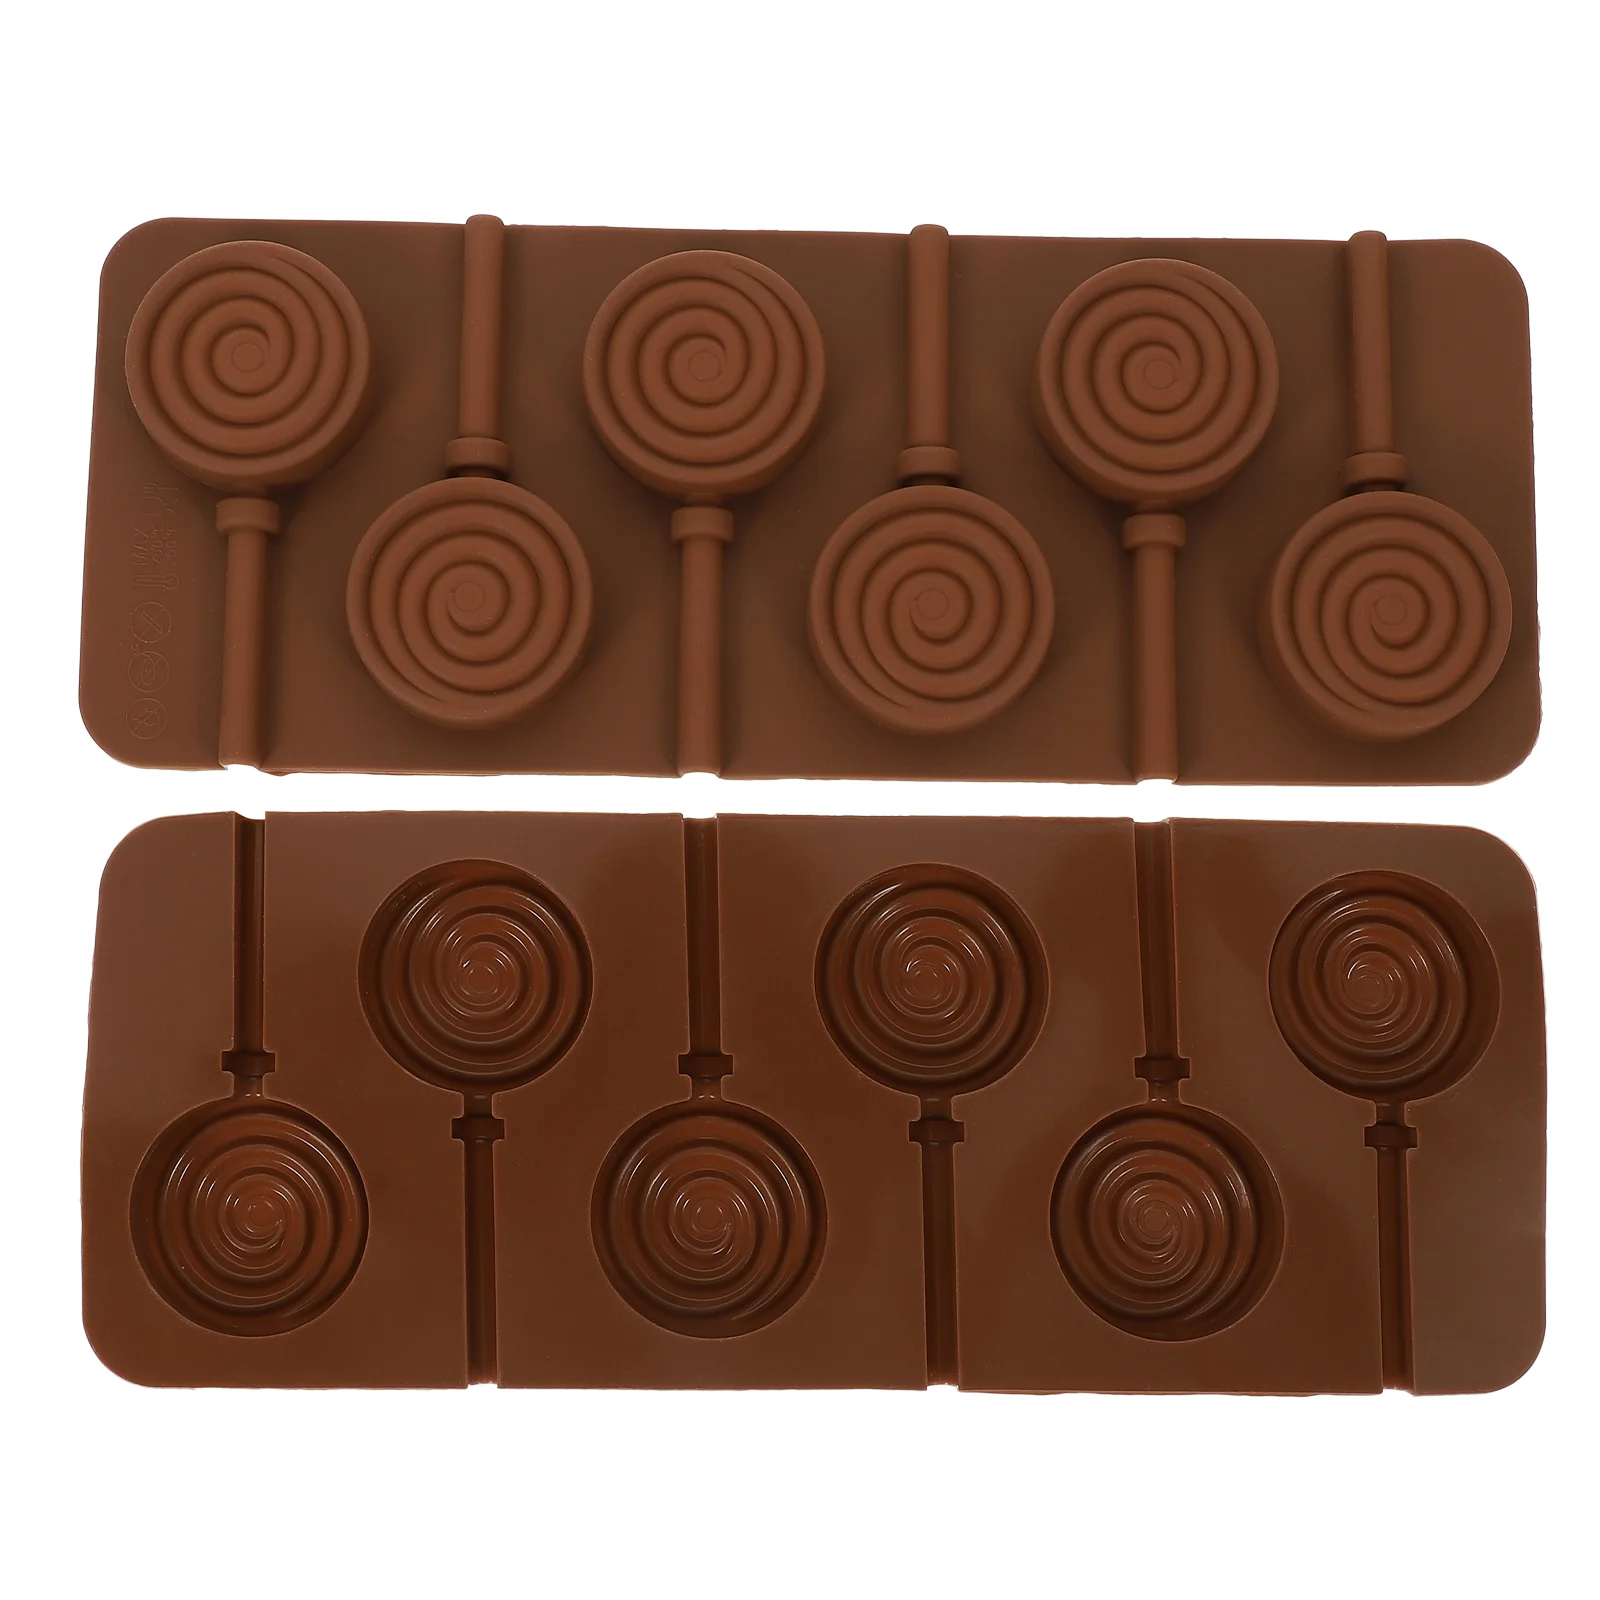 

2Pcs Portable Convenient Decorative Baking Silicone Biscuit Molds Chocolate Bar for Canteen Friends Kitchen Baking